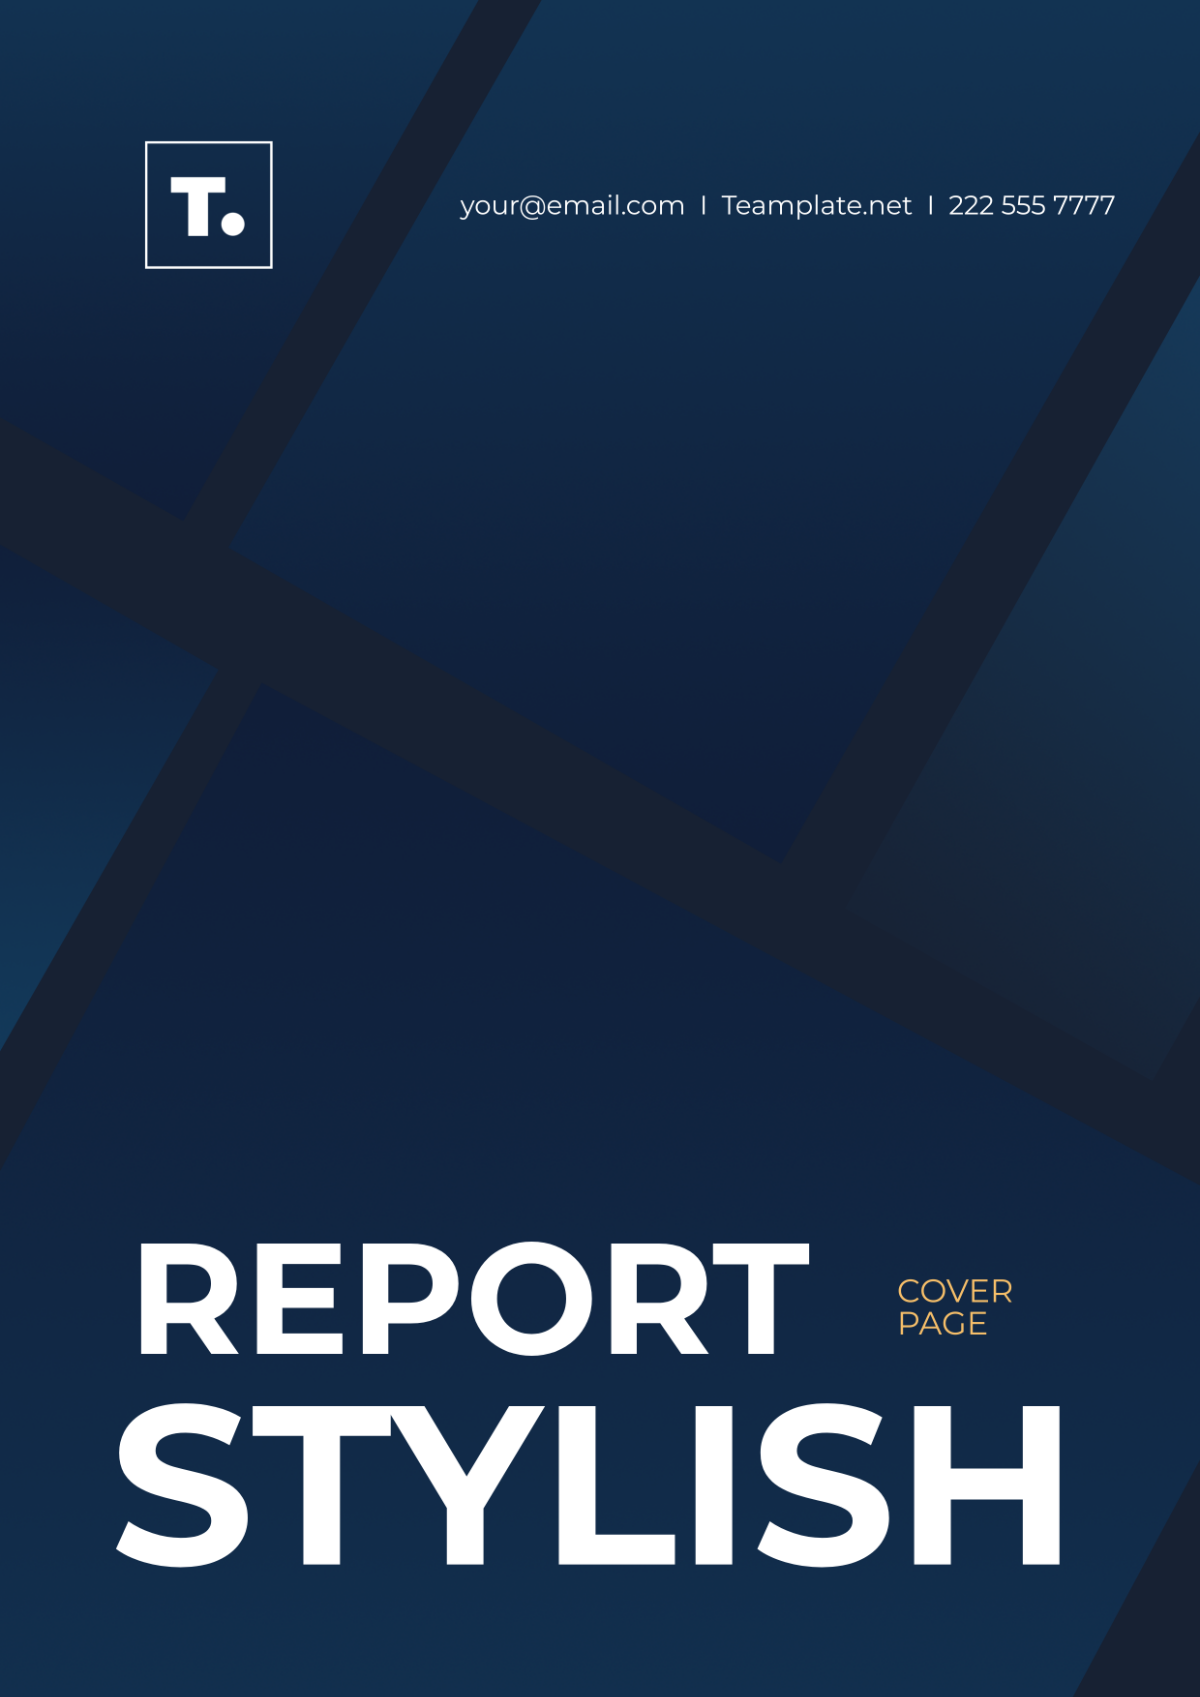 Report Stylish Cover Page Template